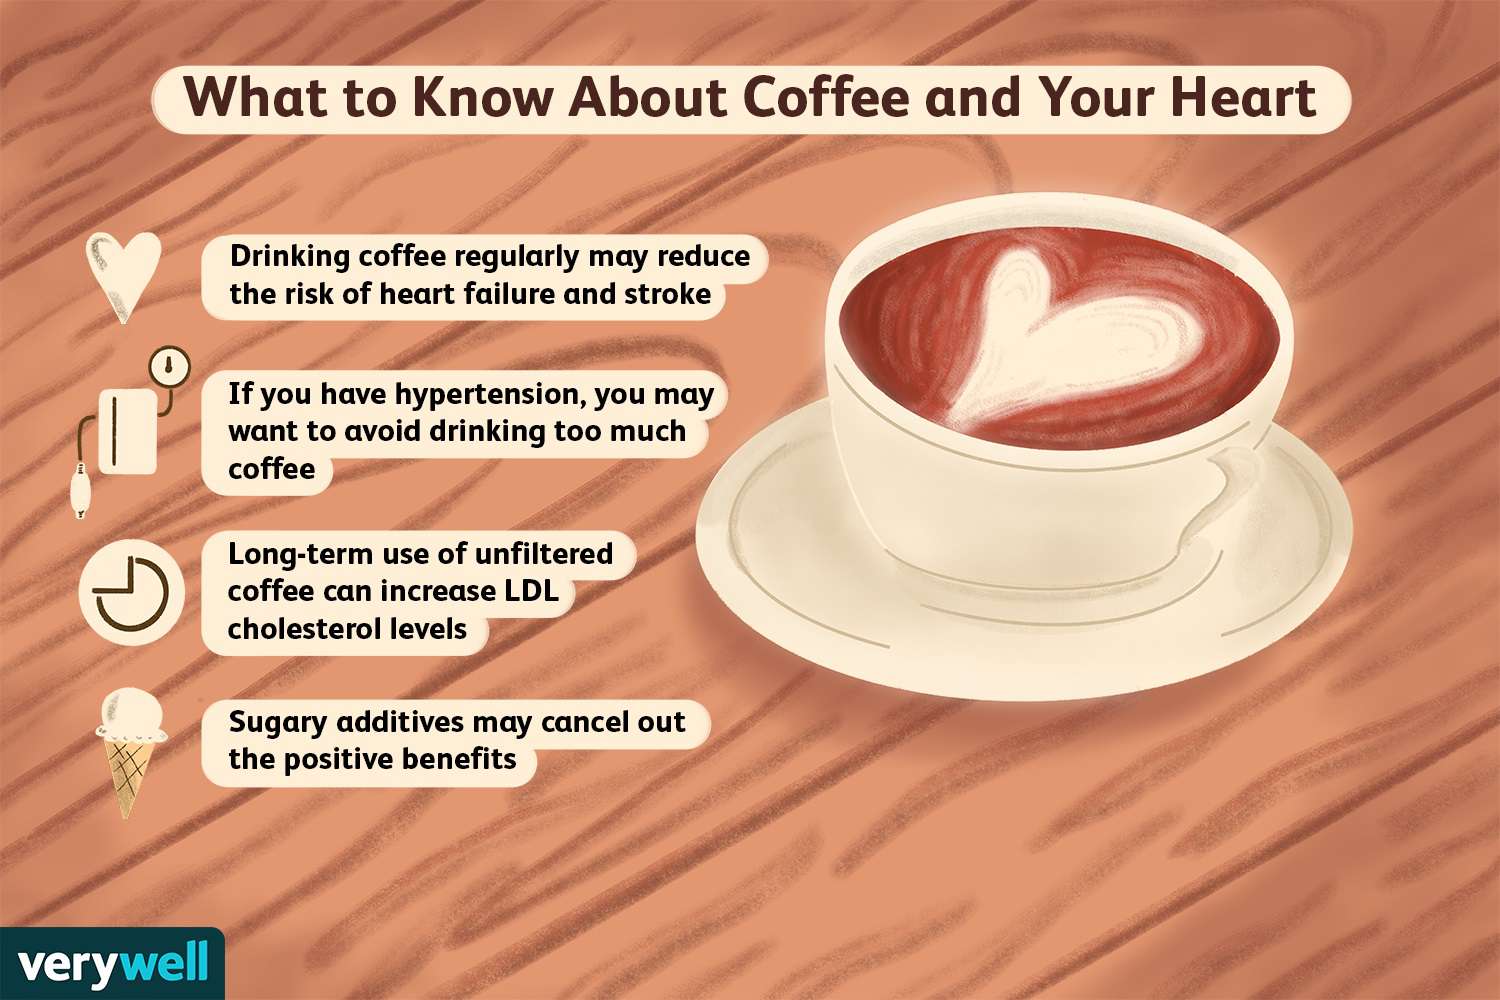 What Kind Of Coffee Is Good For The Heart?